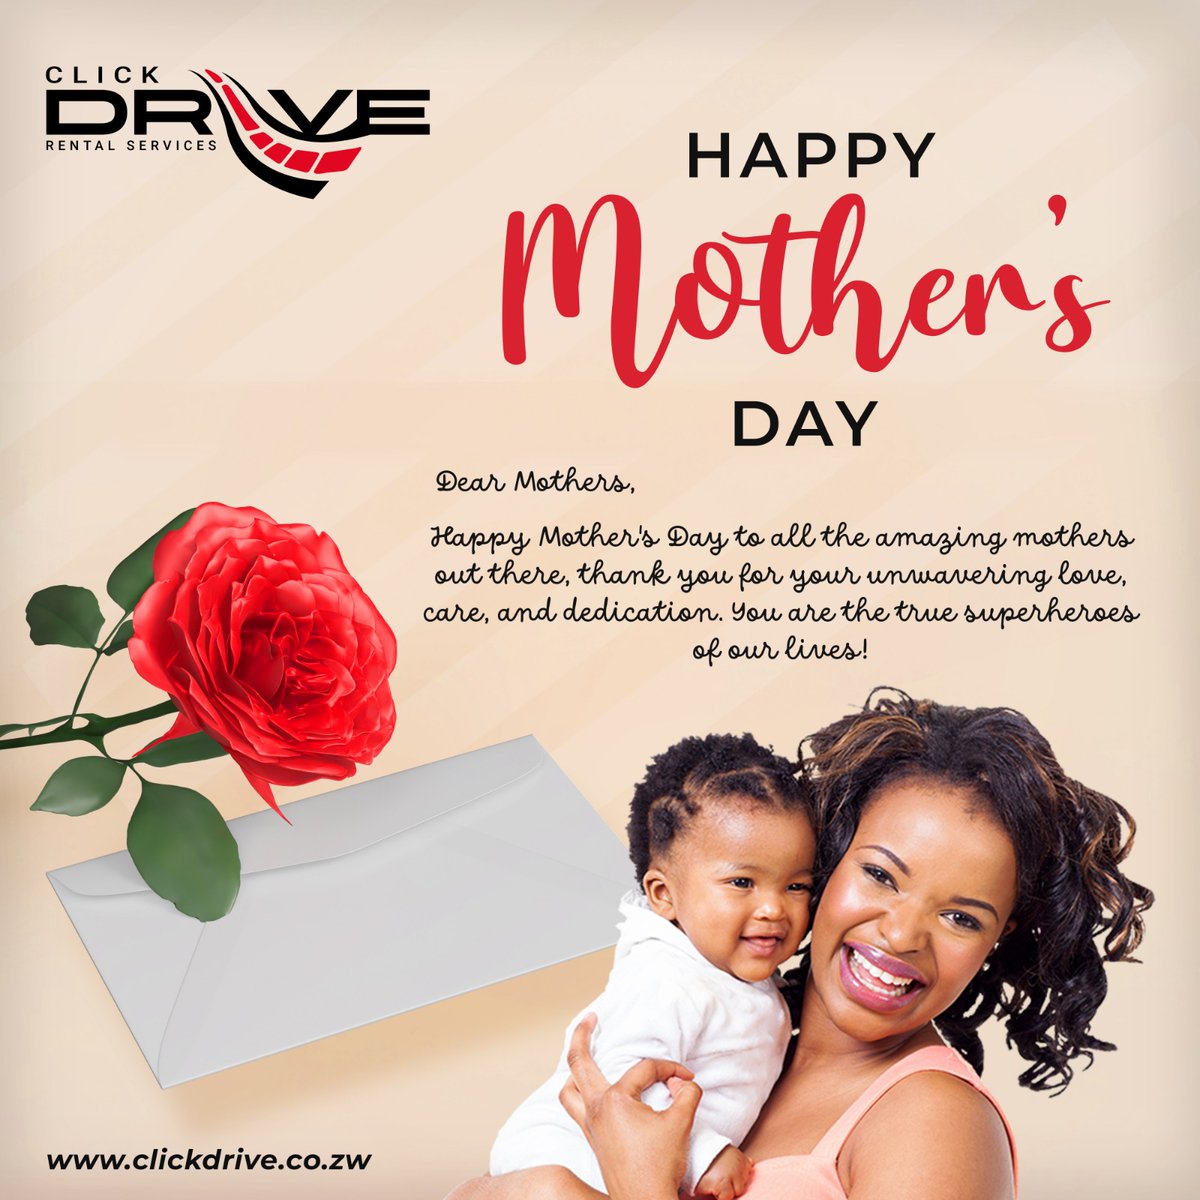 Happy Mother's Day to all amazing mom's out there ! This day is all about celebrating you . #mothersday #ClickDrive #carhireservices #happiness